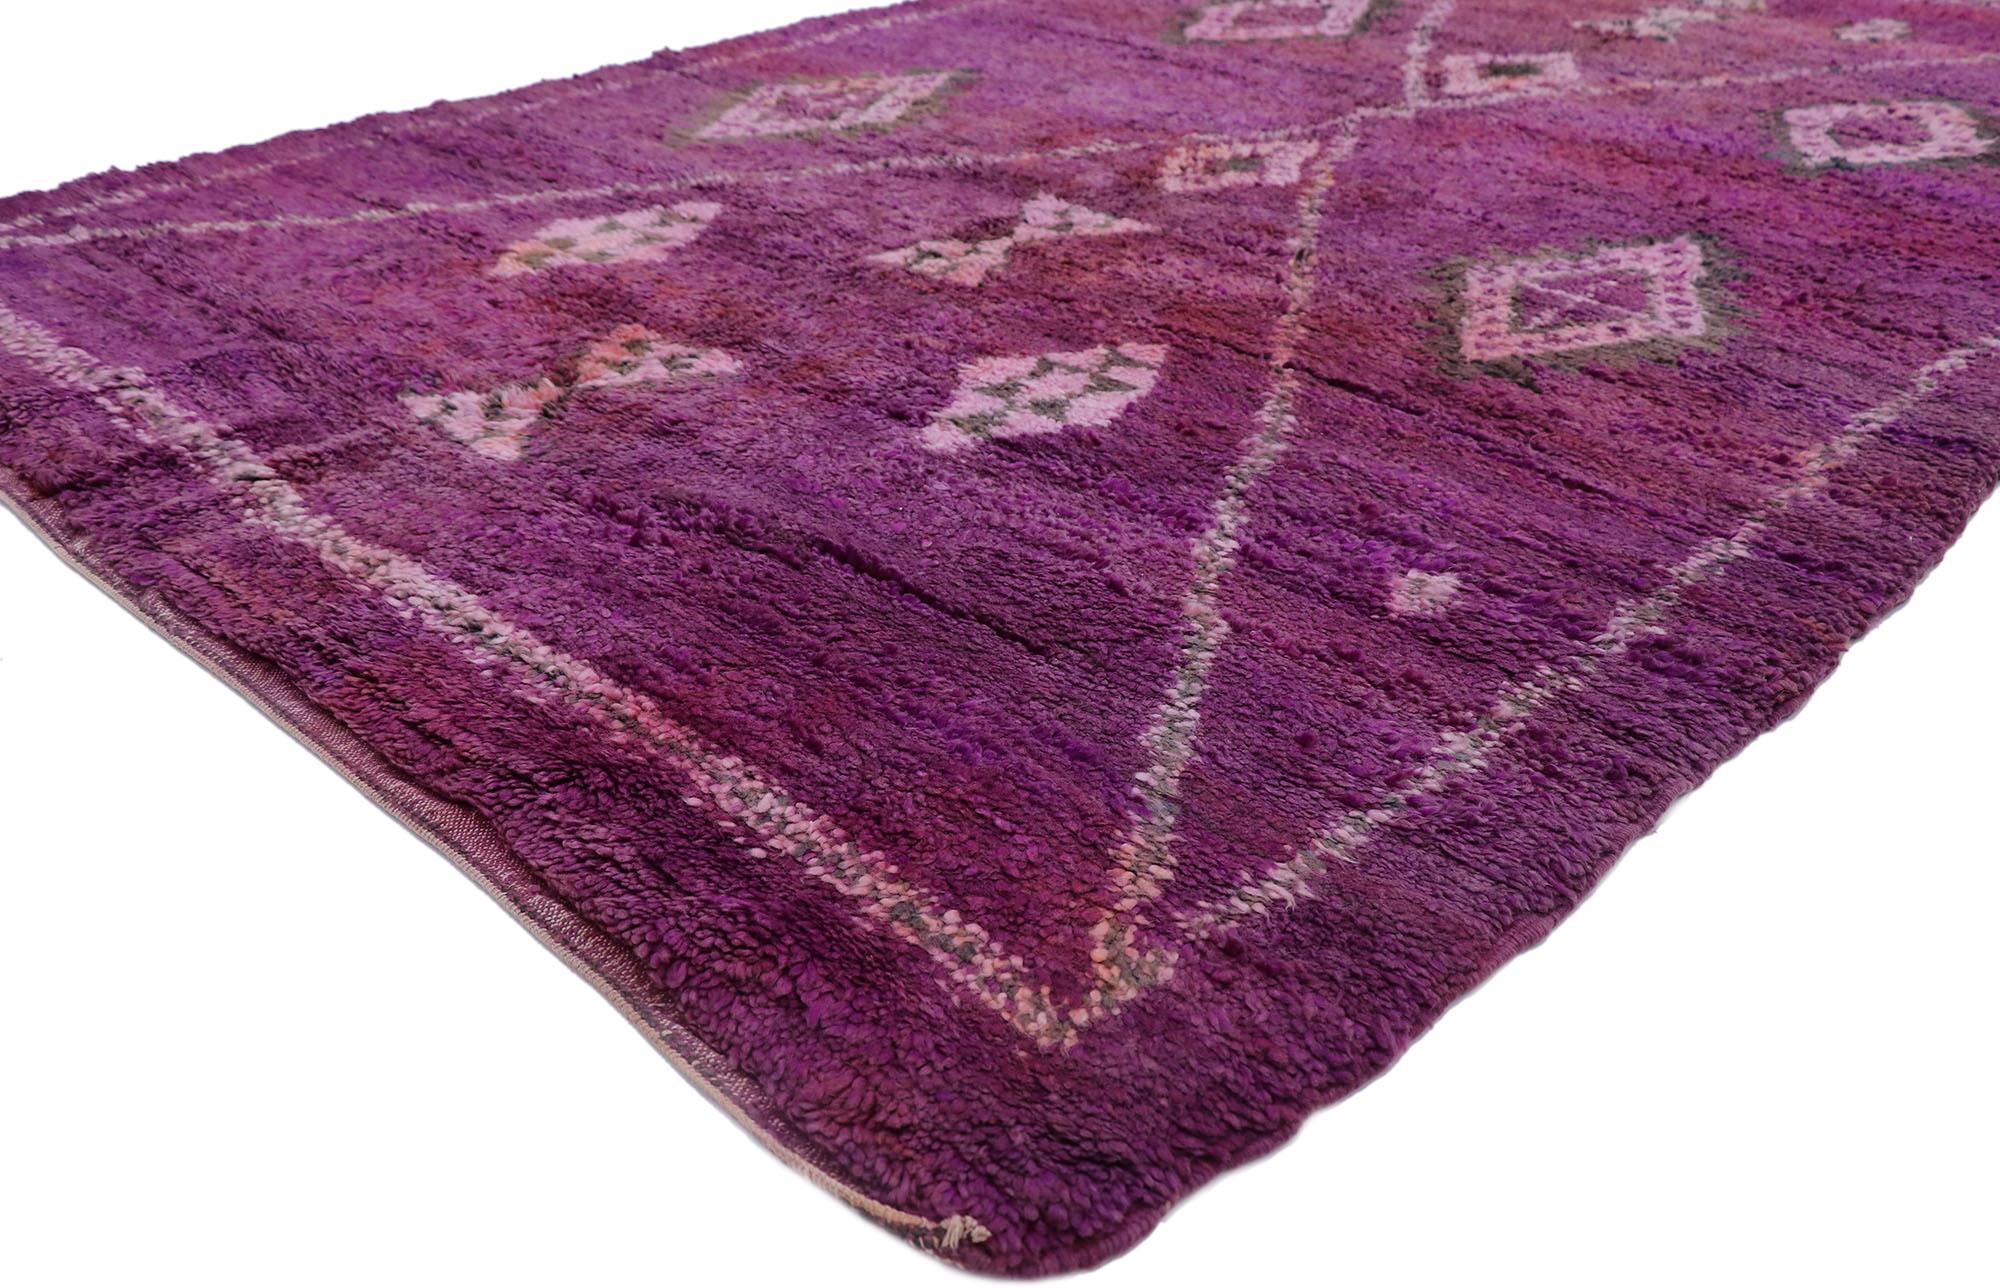 21223 Vintage Beni Mrirt Purple Moroccan Rug, 06'00 x 09'09. Beni Mrirt rugs are a type of handwoven rug traditionally made by the Beni Mrirt tribe, which is a subgroup of the larger Berber tribe in Morocco. These rugs are known for their thick